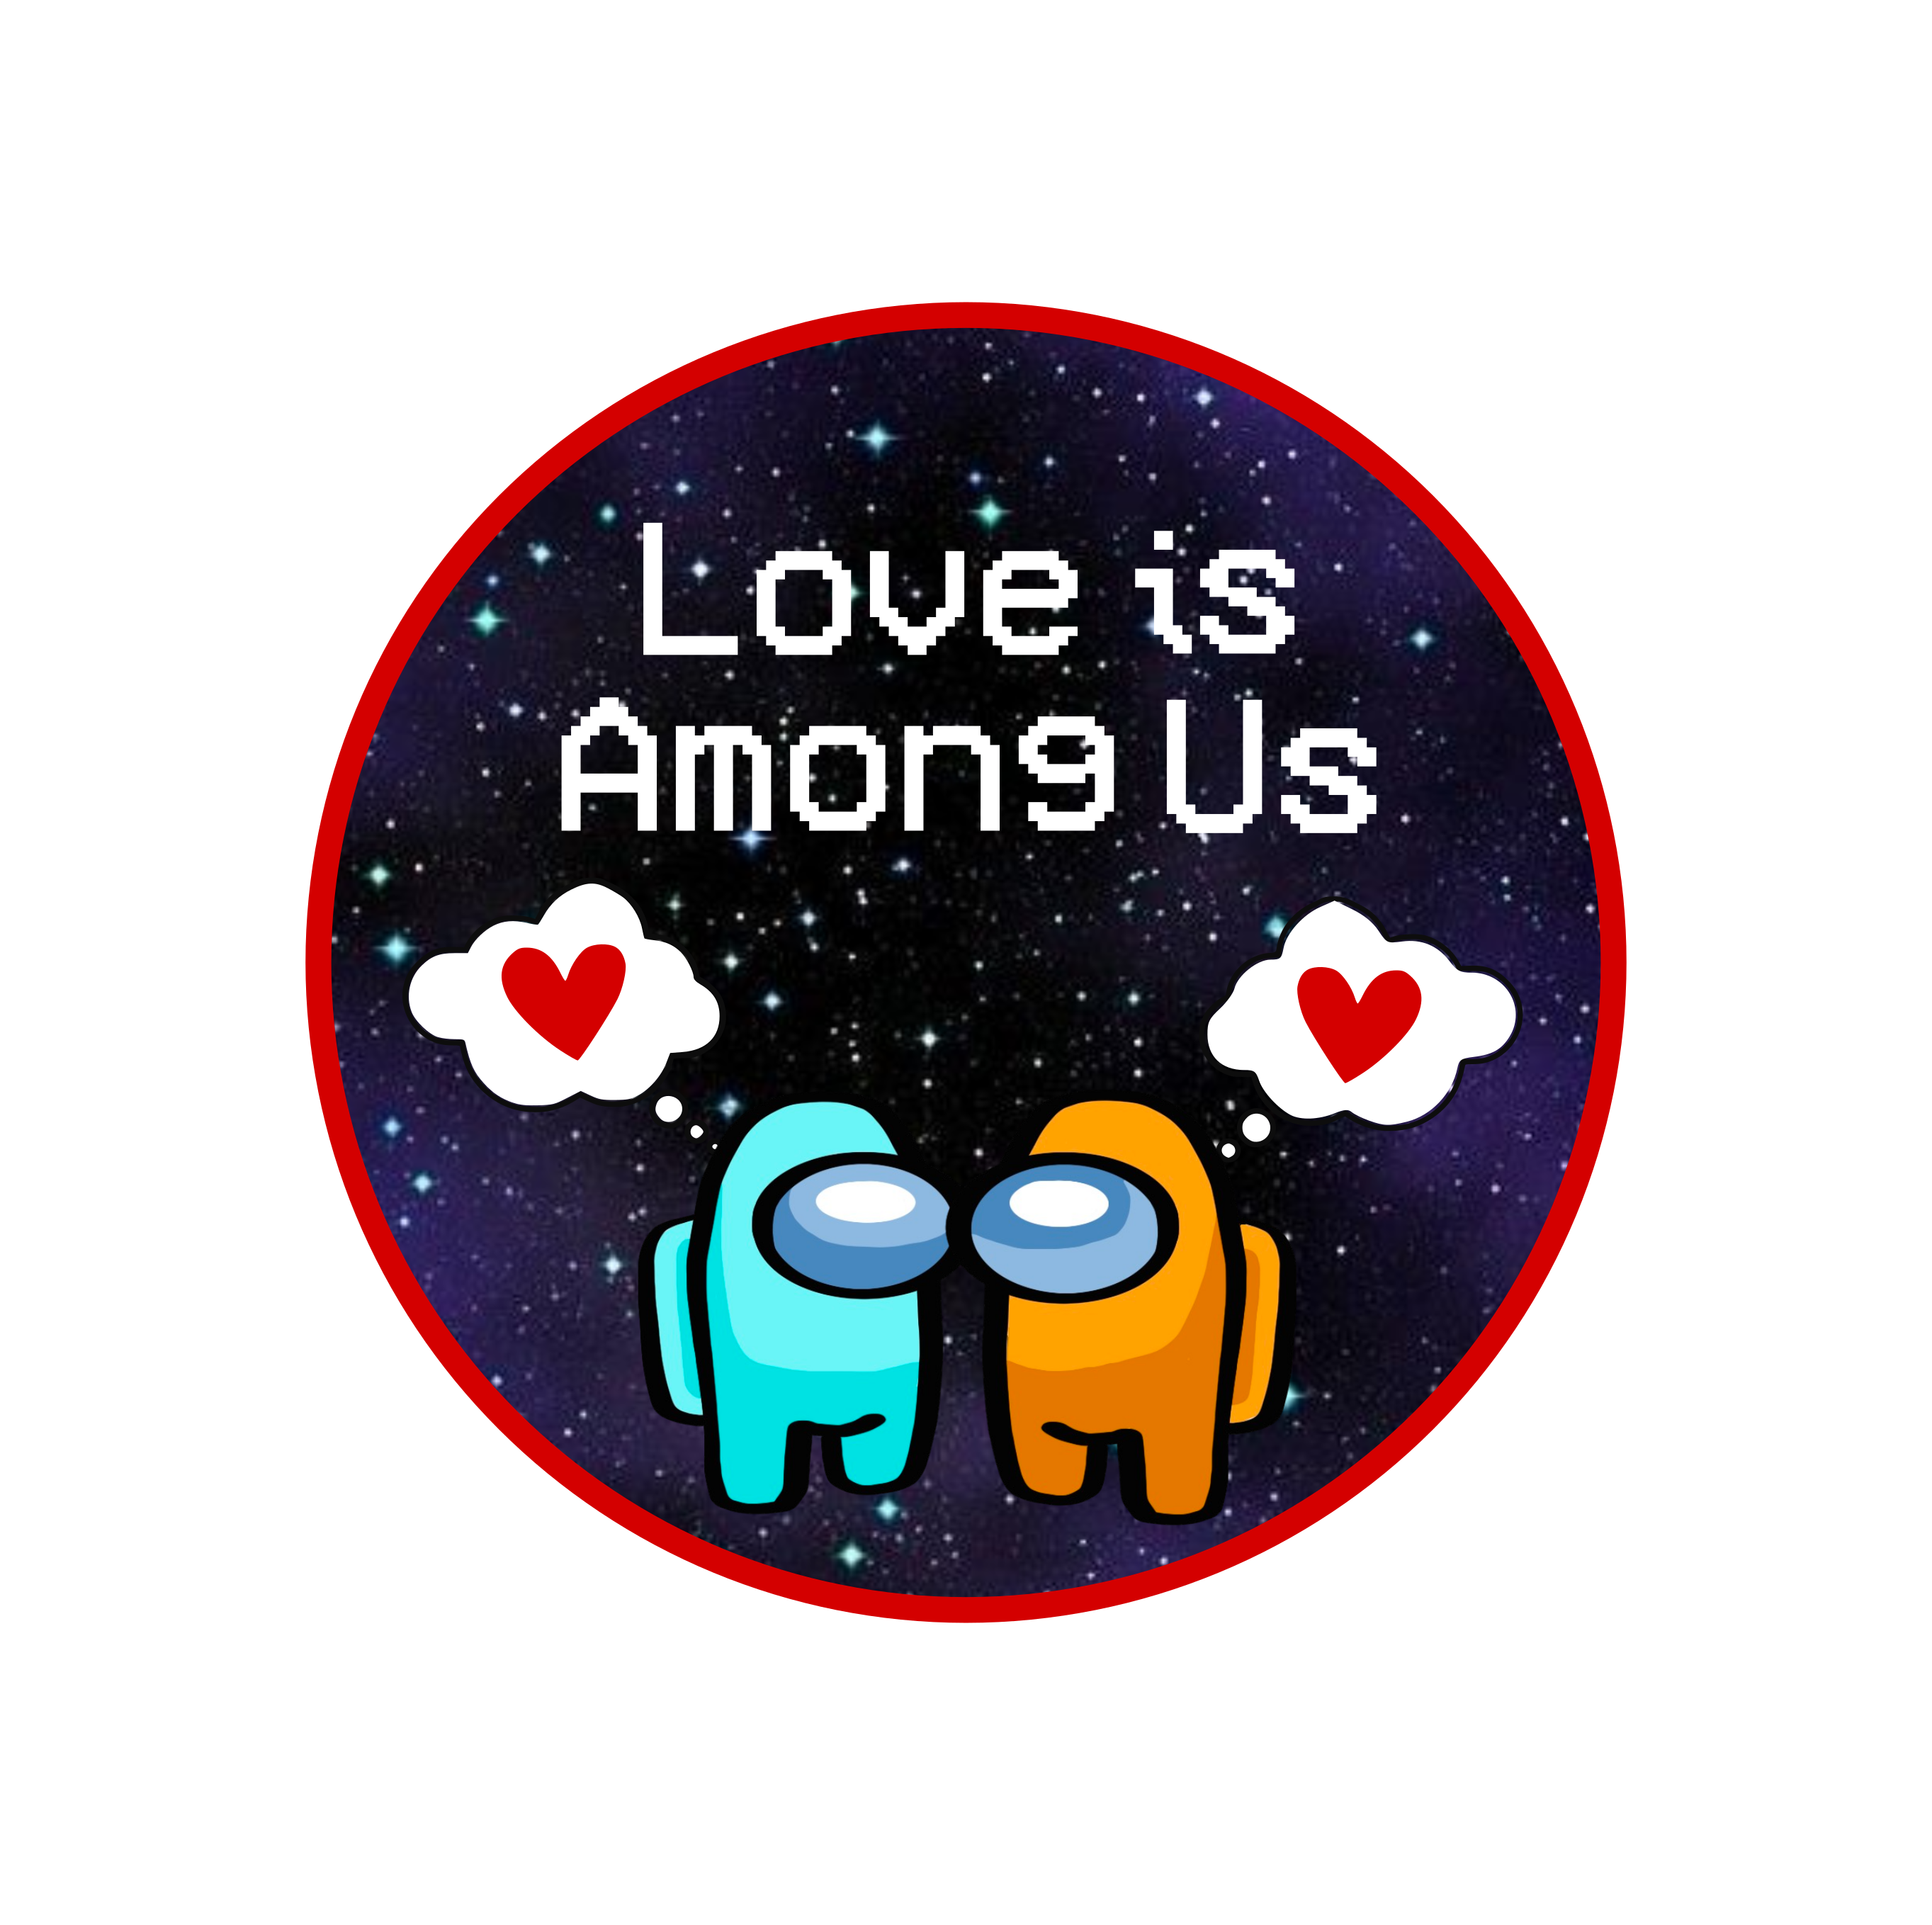 among us Can't spell sus without us | Valentines Among Us PNG JPG